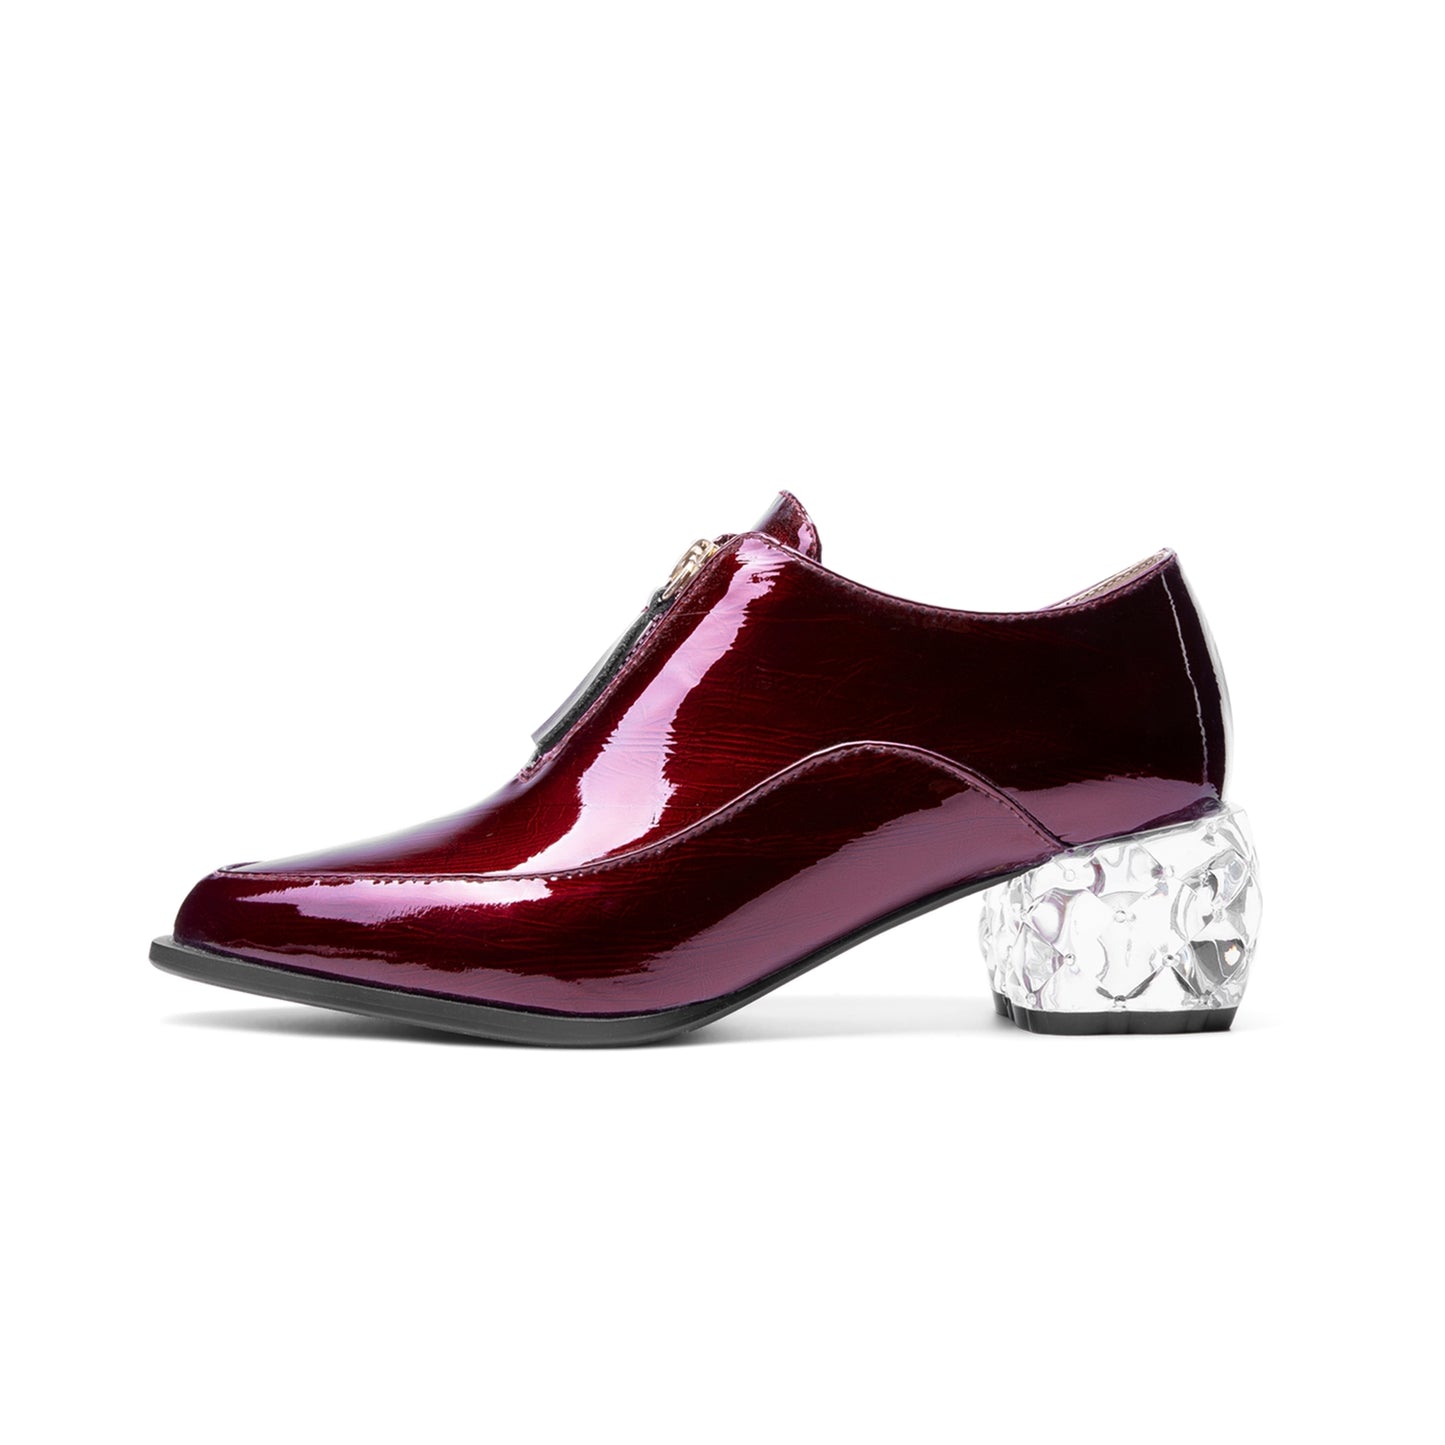 TinaCus Women's Glossy Patent Leather Handmade Clear Pointed Toe Chunky Heel Front Zip Pumps